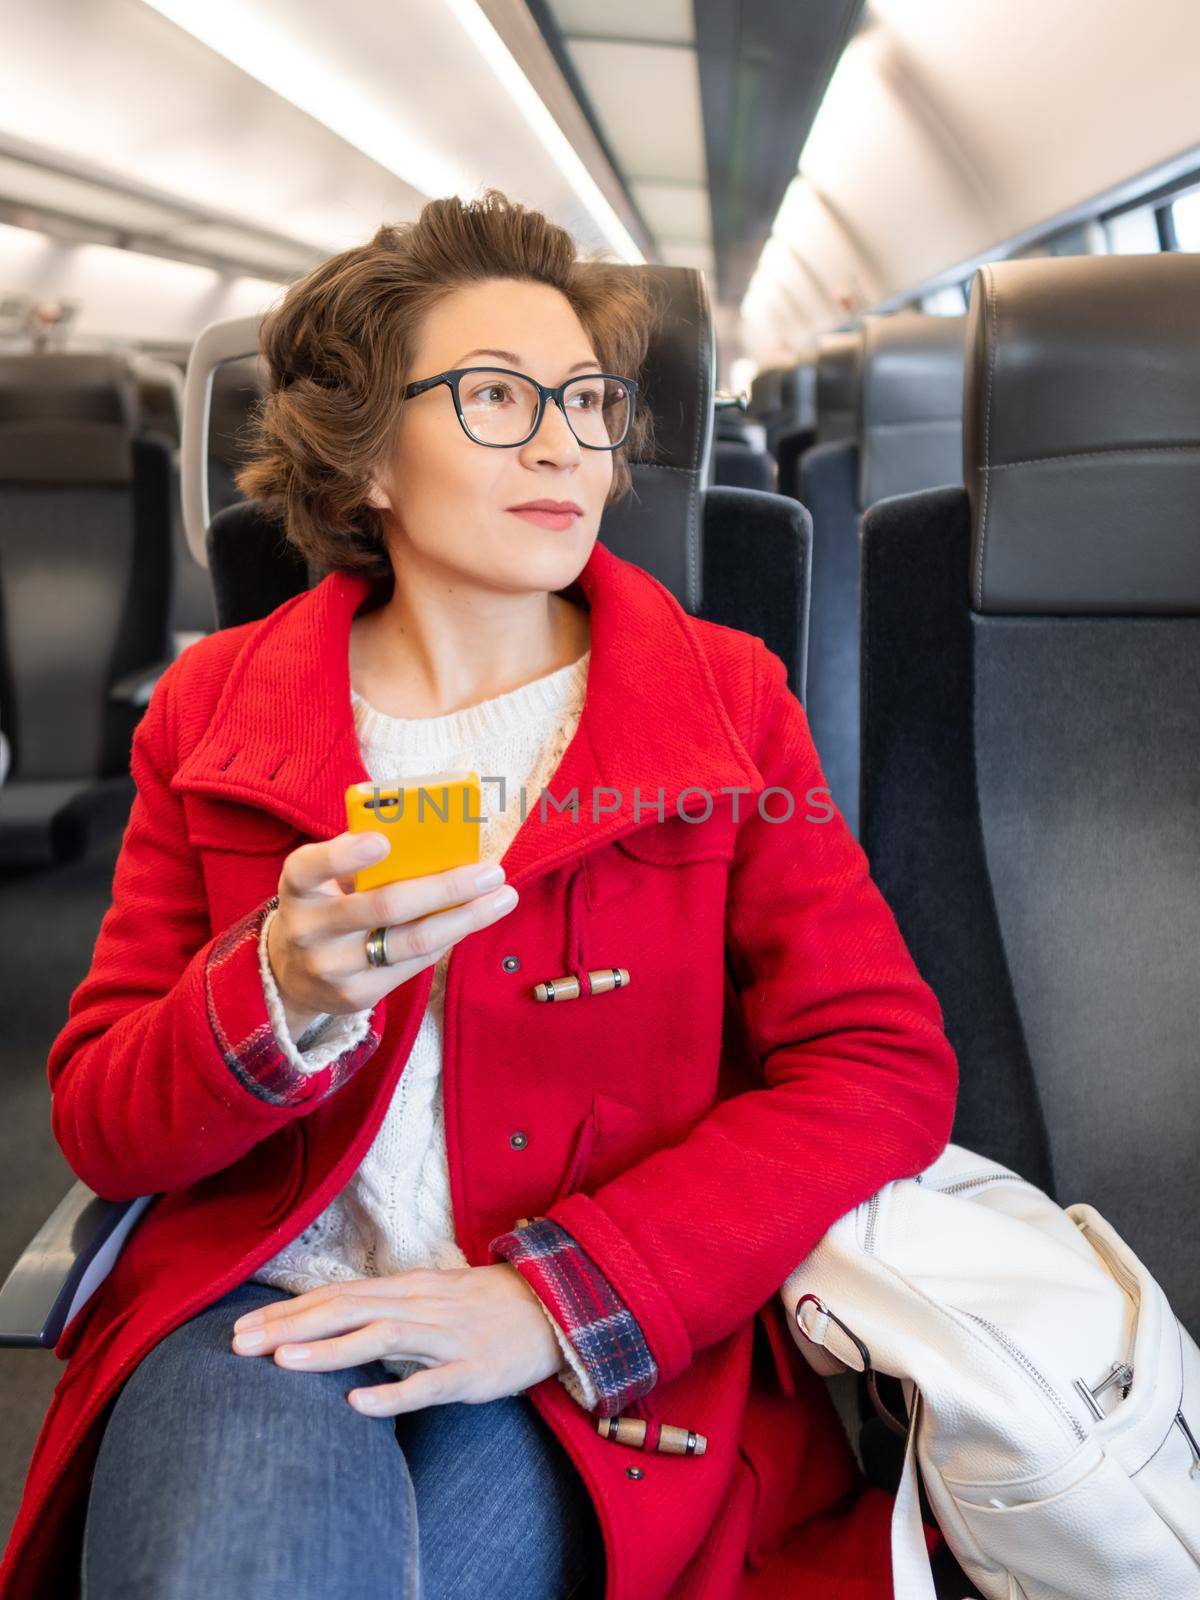 Woman in red duffle coat texting on smartphone in suburban train. Travel by land vehicle.